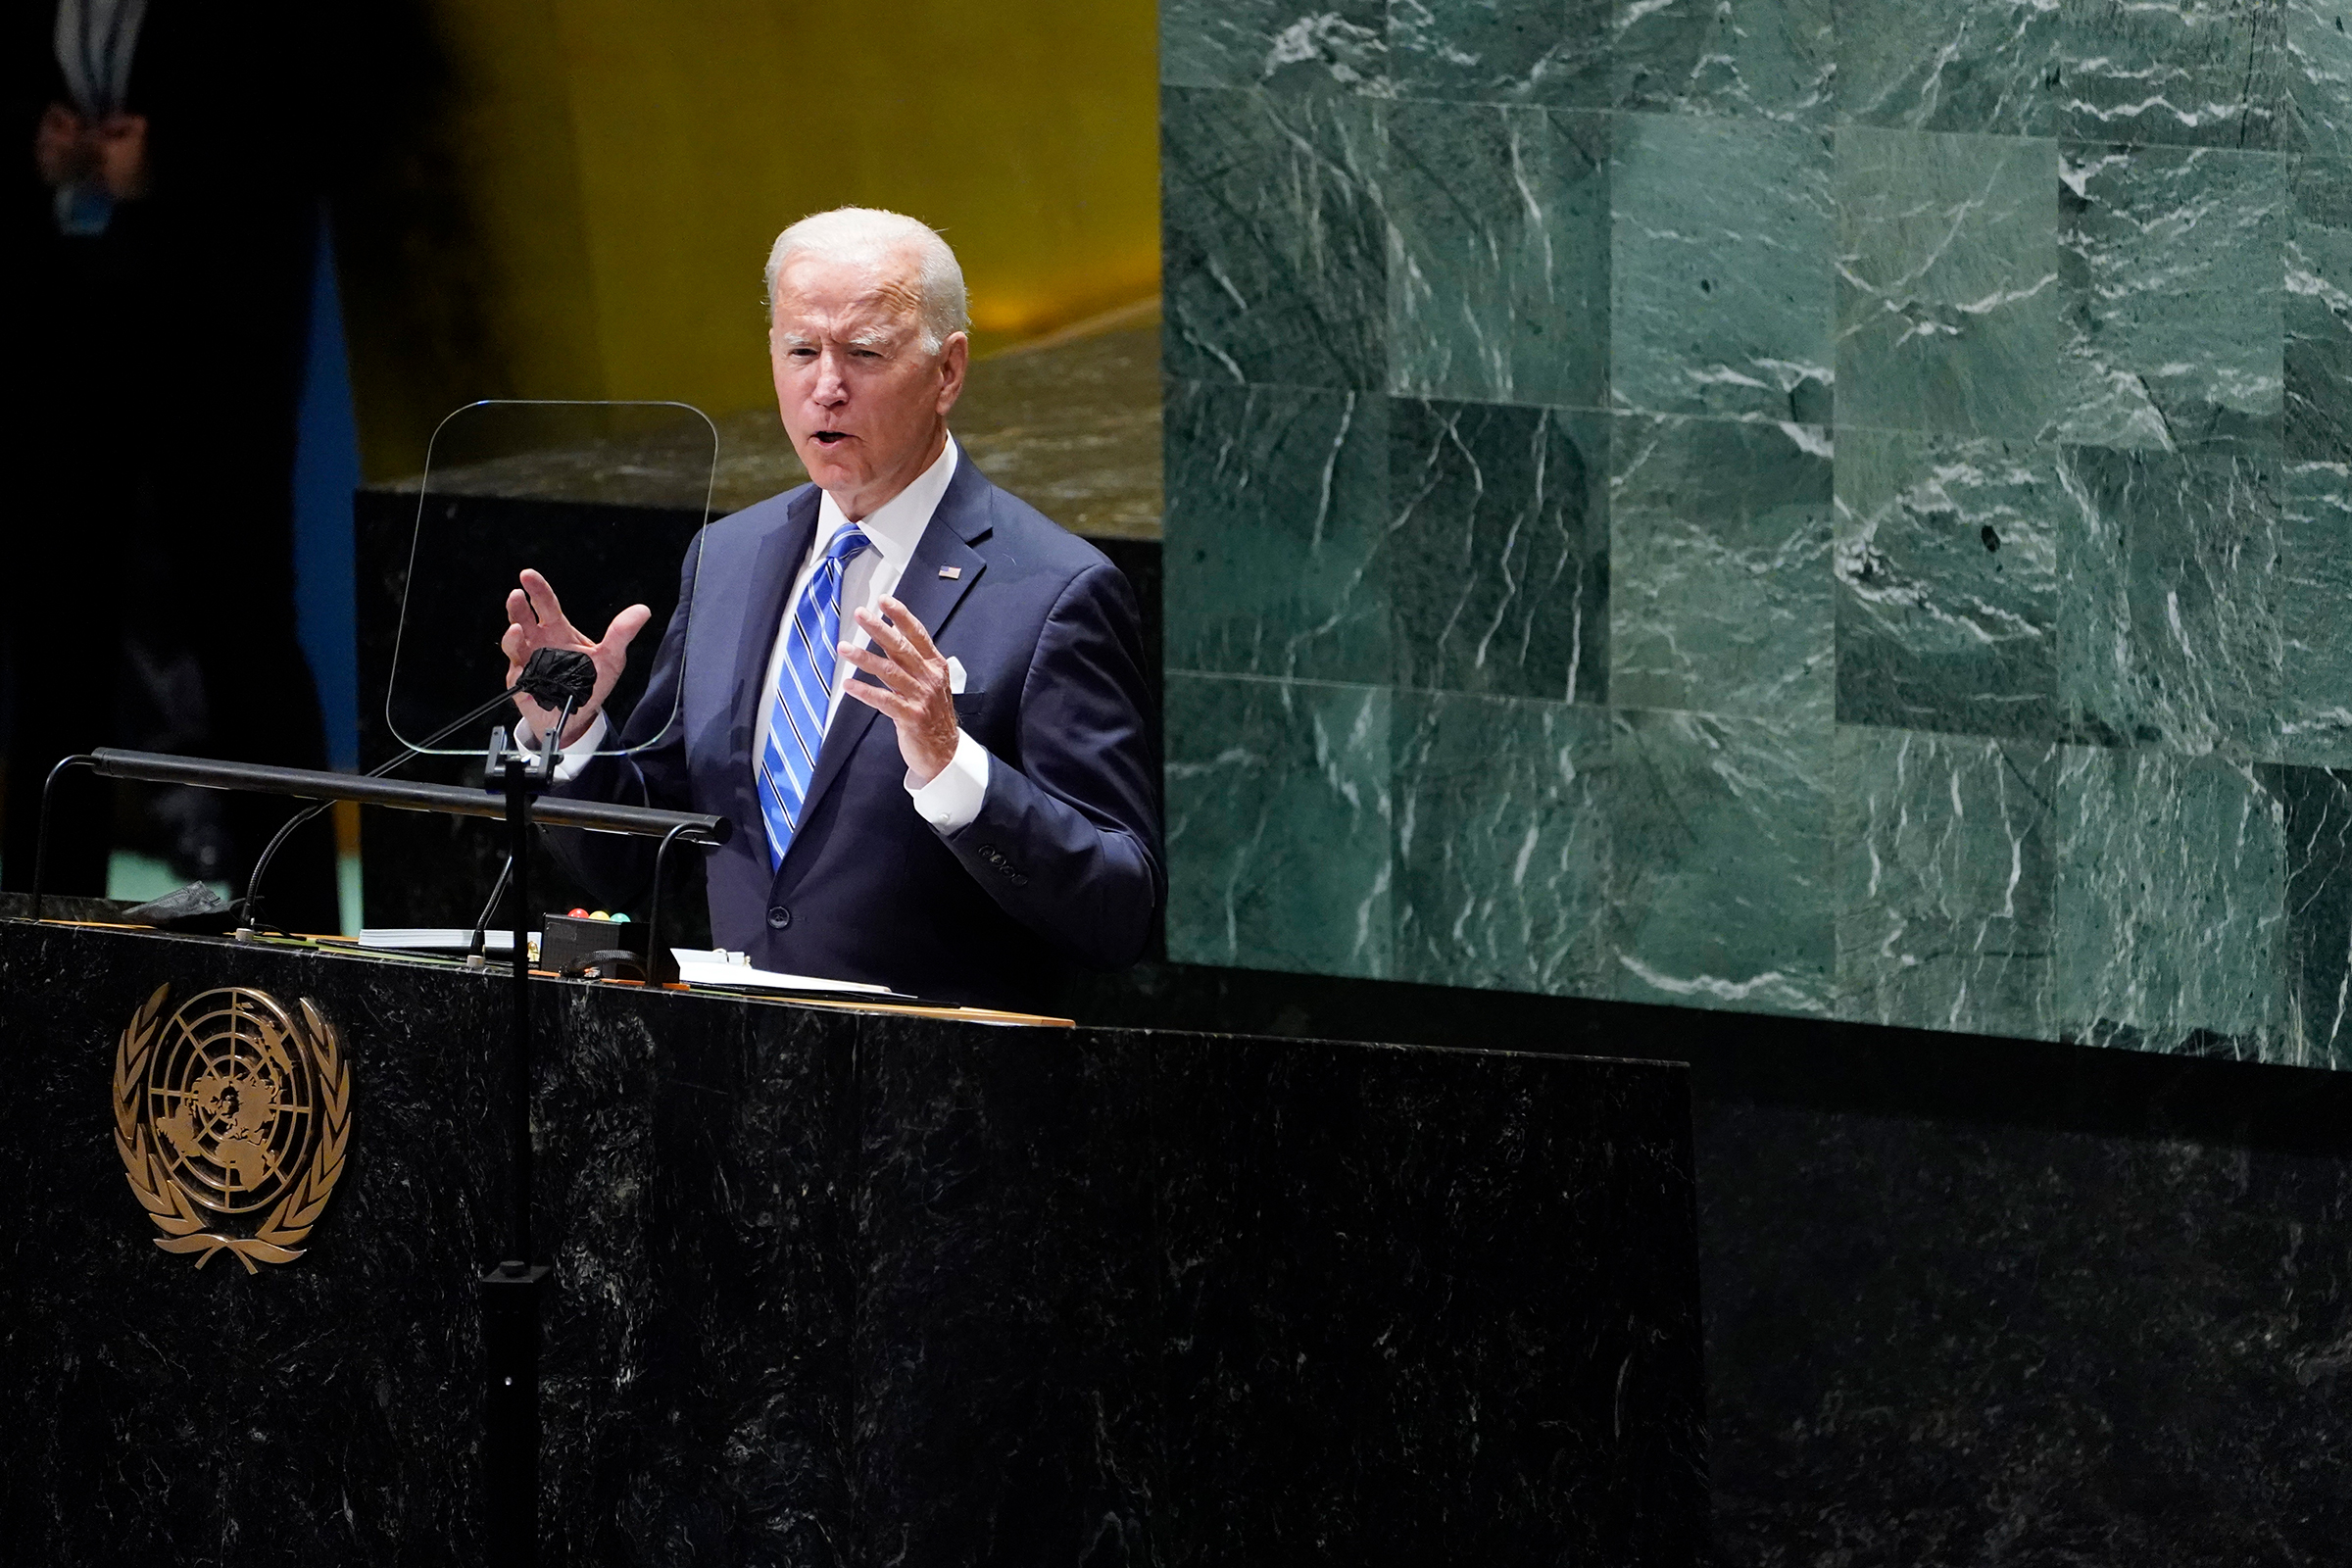 President Joe Biden delivers remarks to the United Nations General Assembly in New York on Sept. 21. (Evan Vucci—AP)